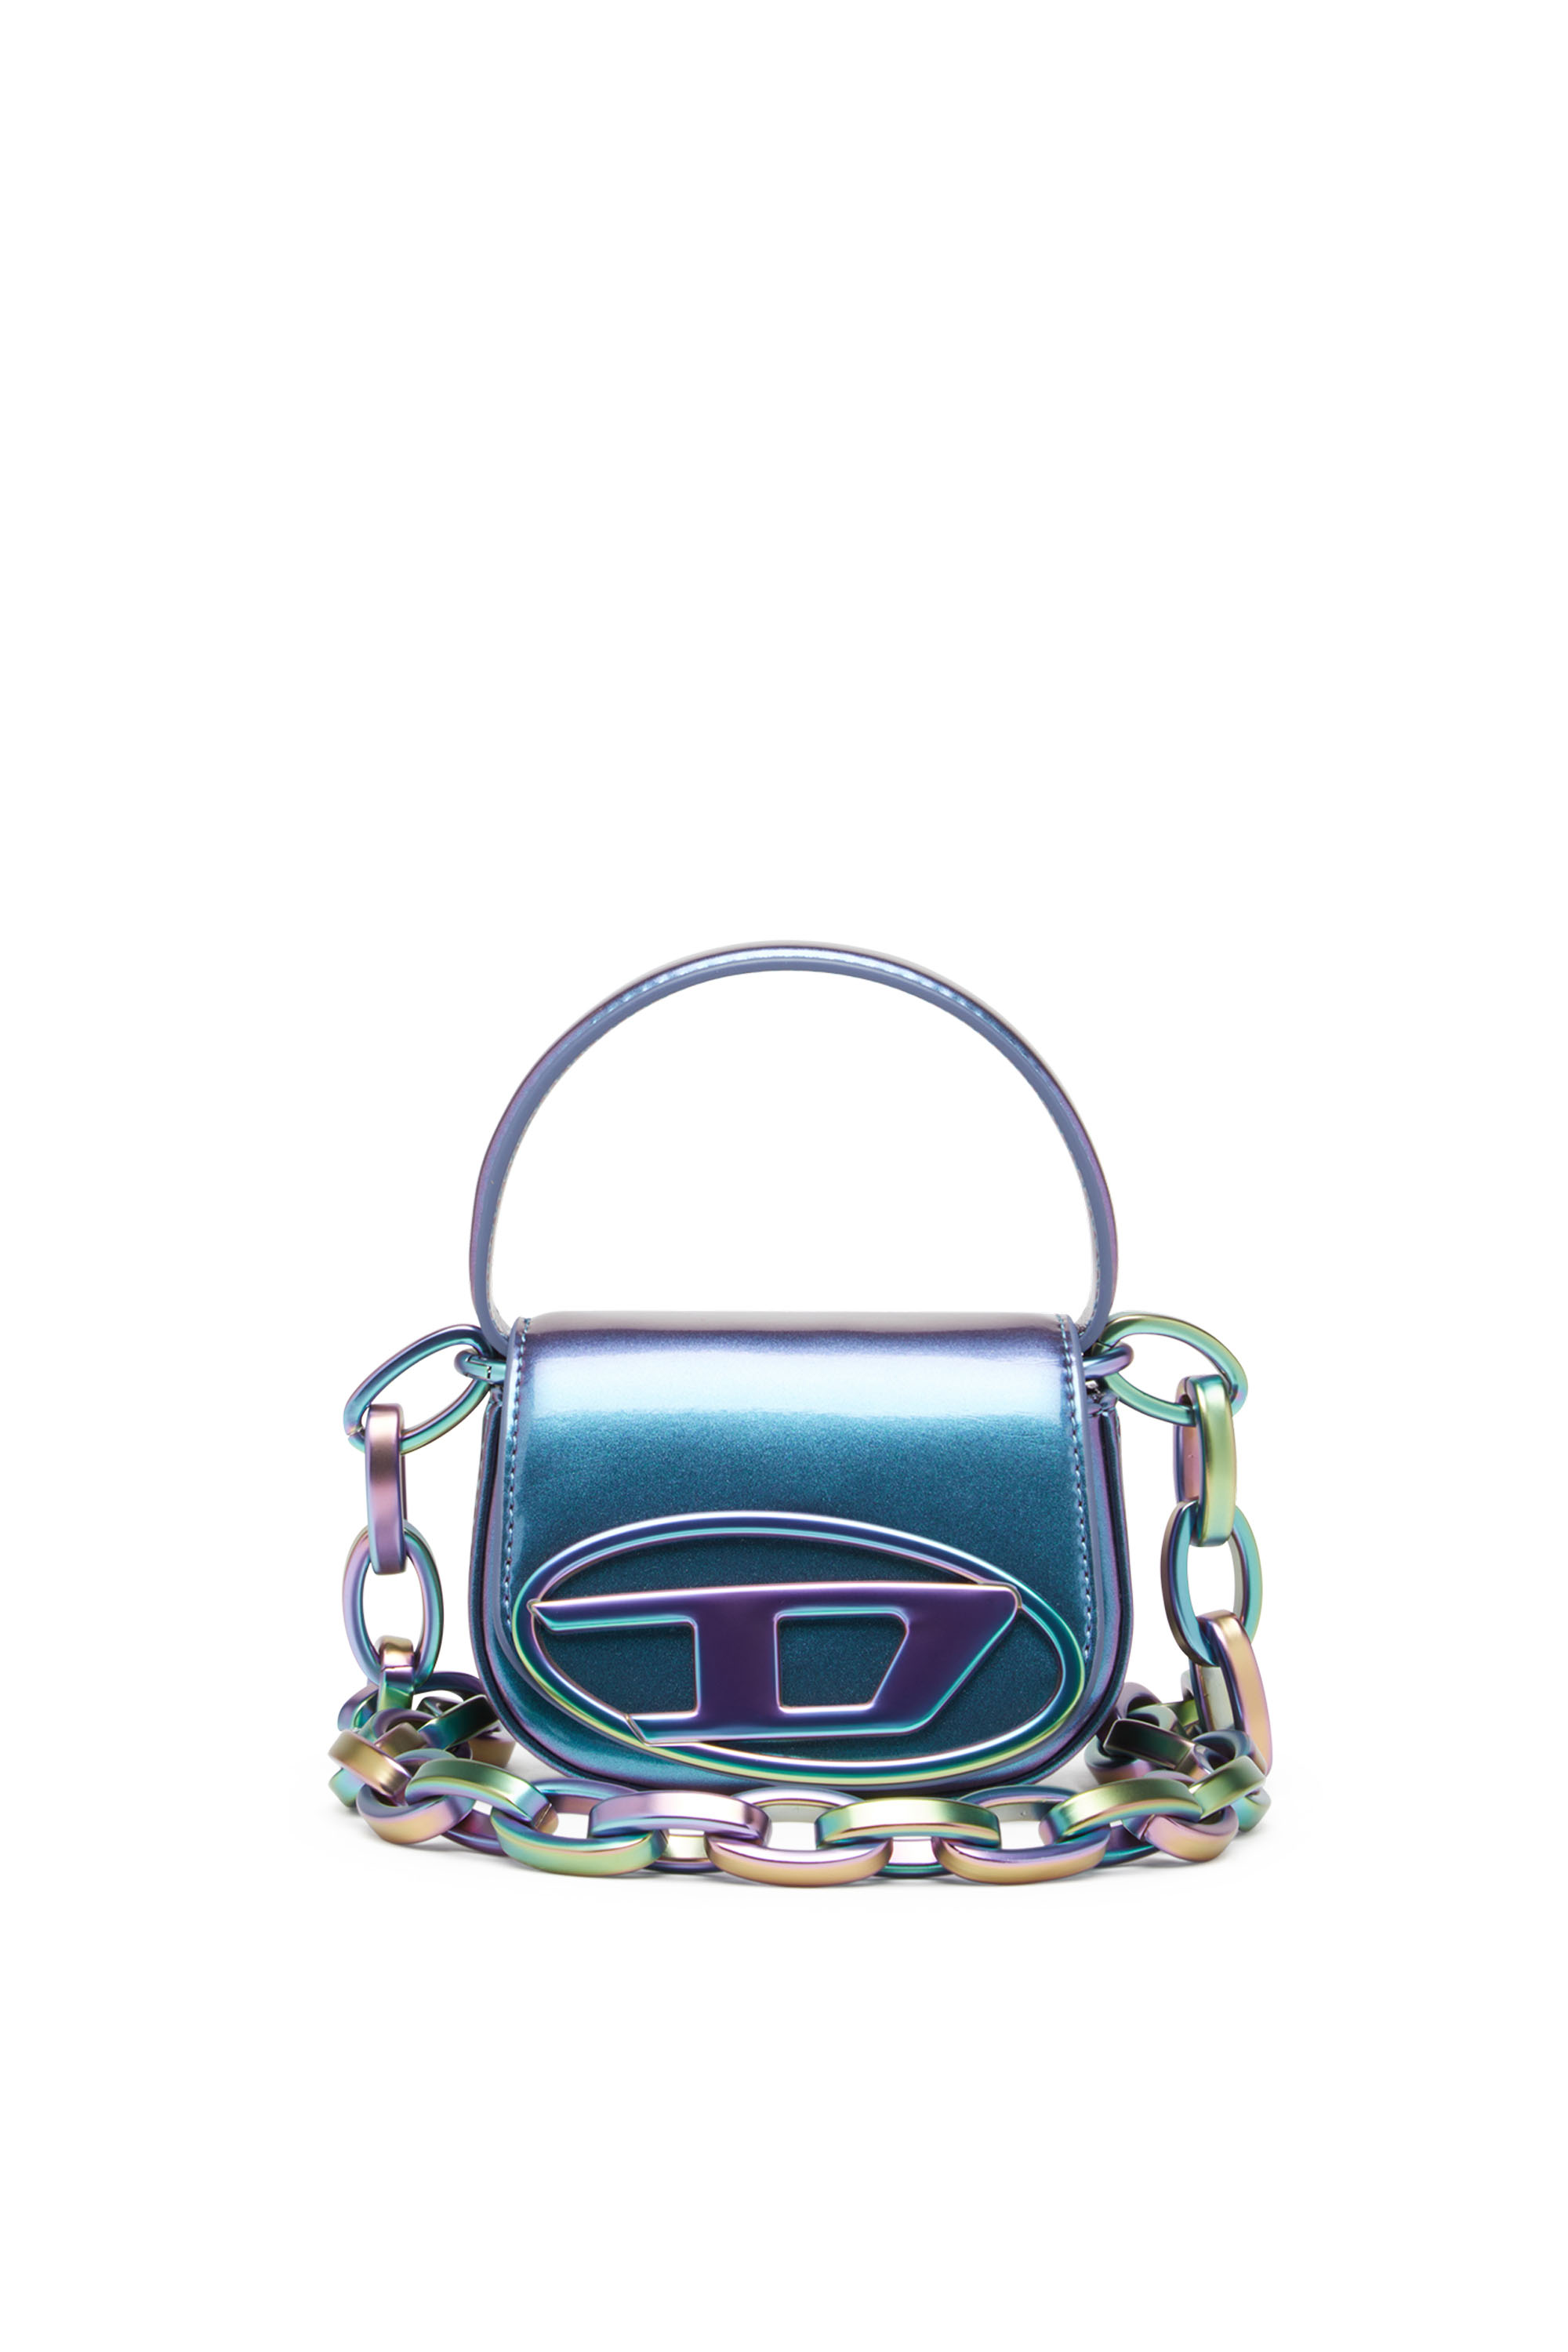 Diesel - 1DR XS, Woman 1DR XS-Iconic iridescent mini bag in Blue - Image 1